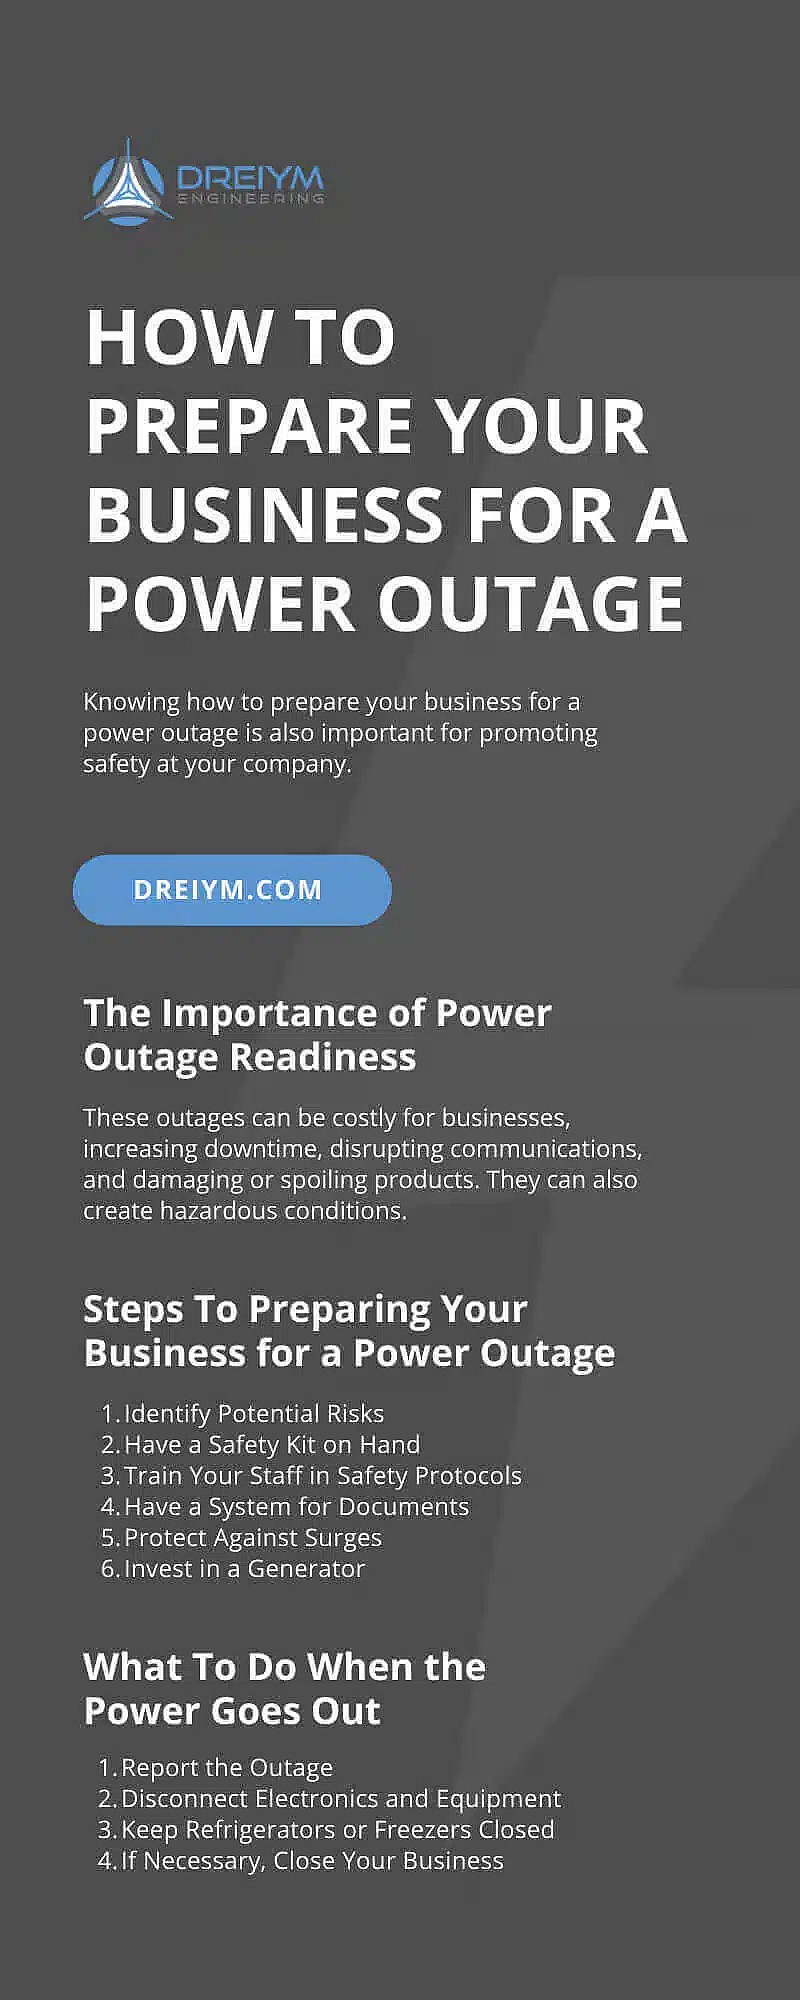 How To Prepare Your Business for a Power Outage